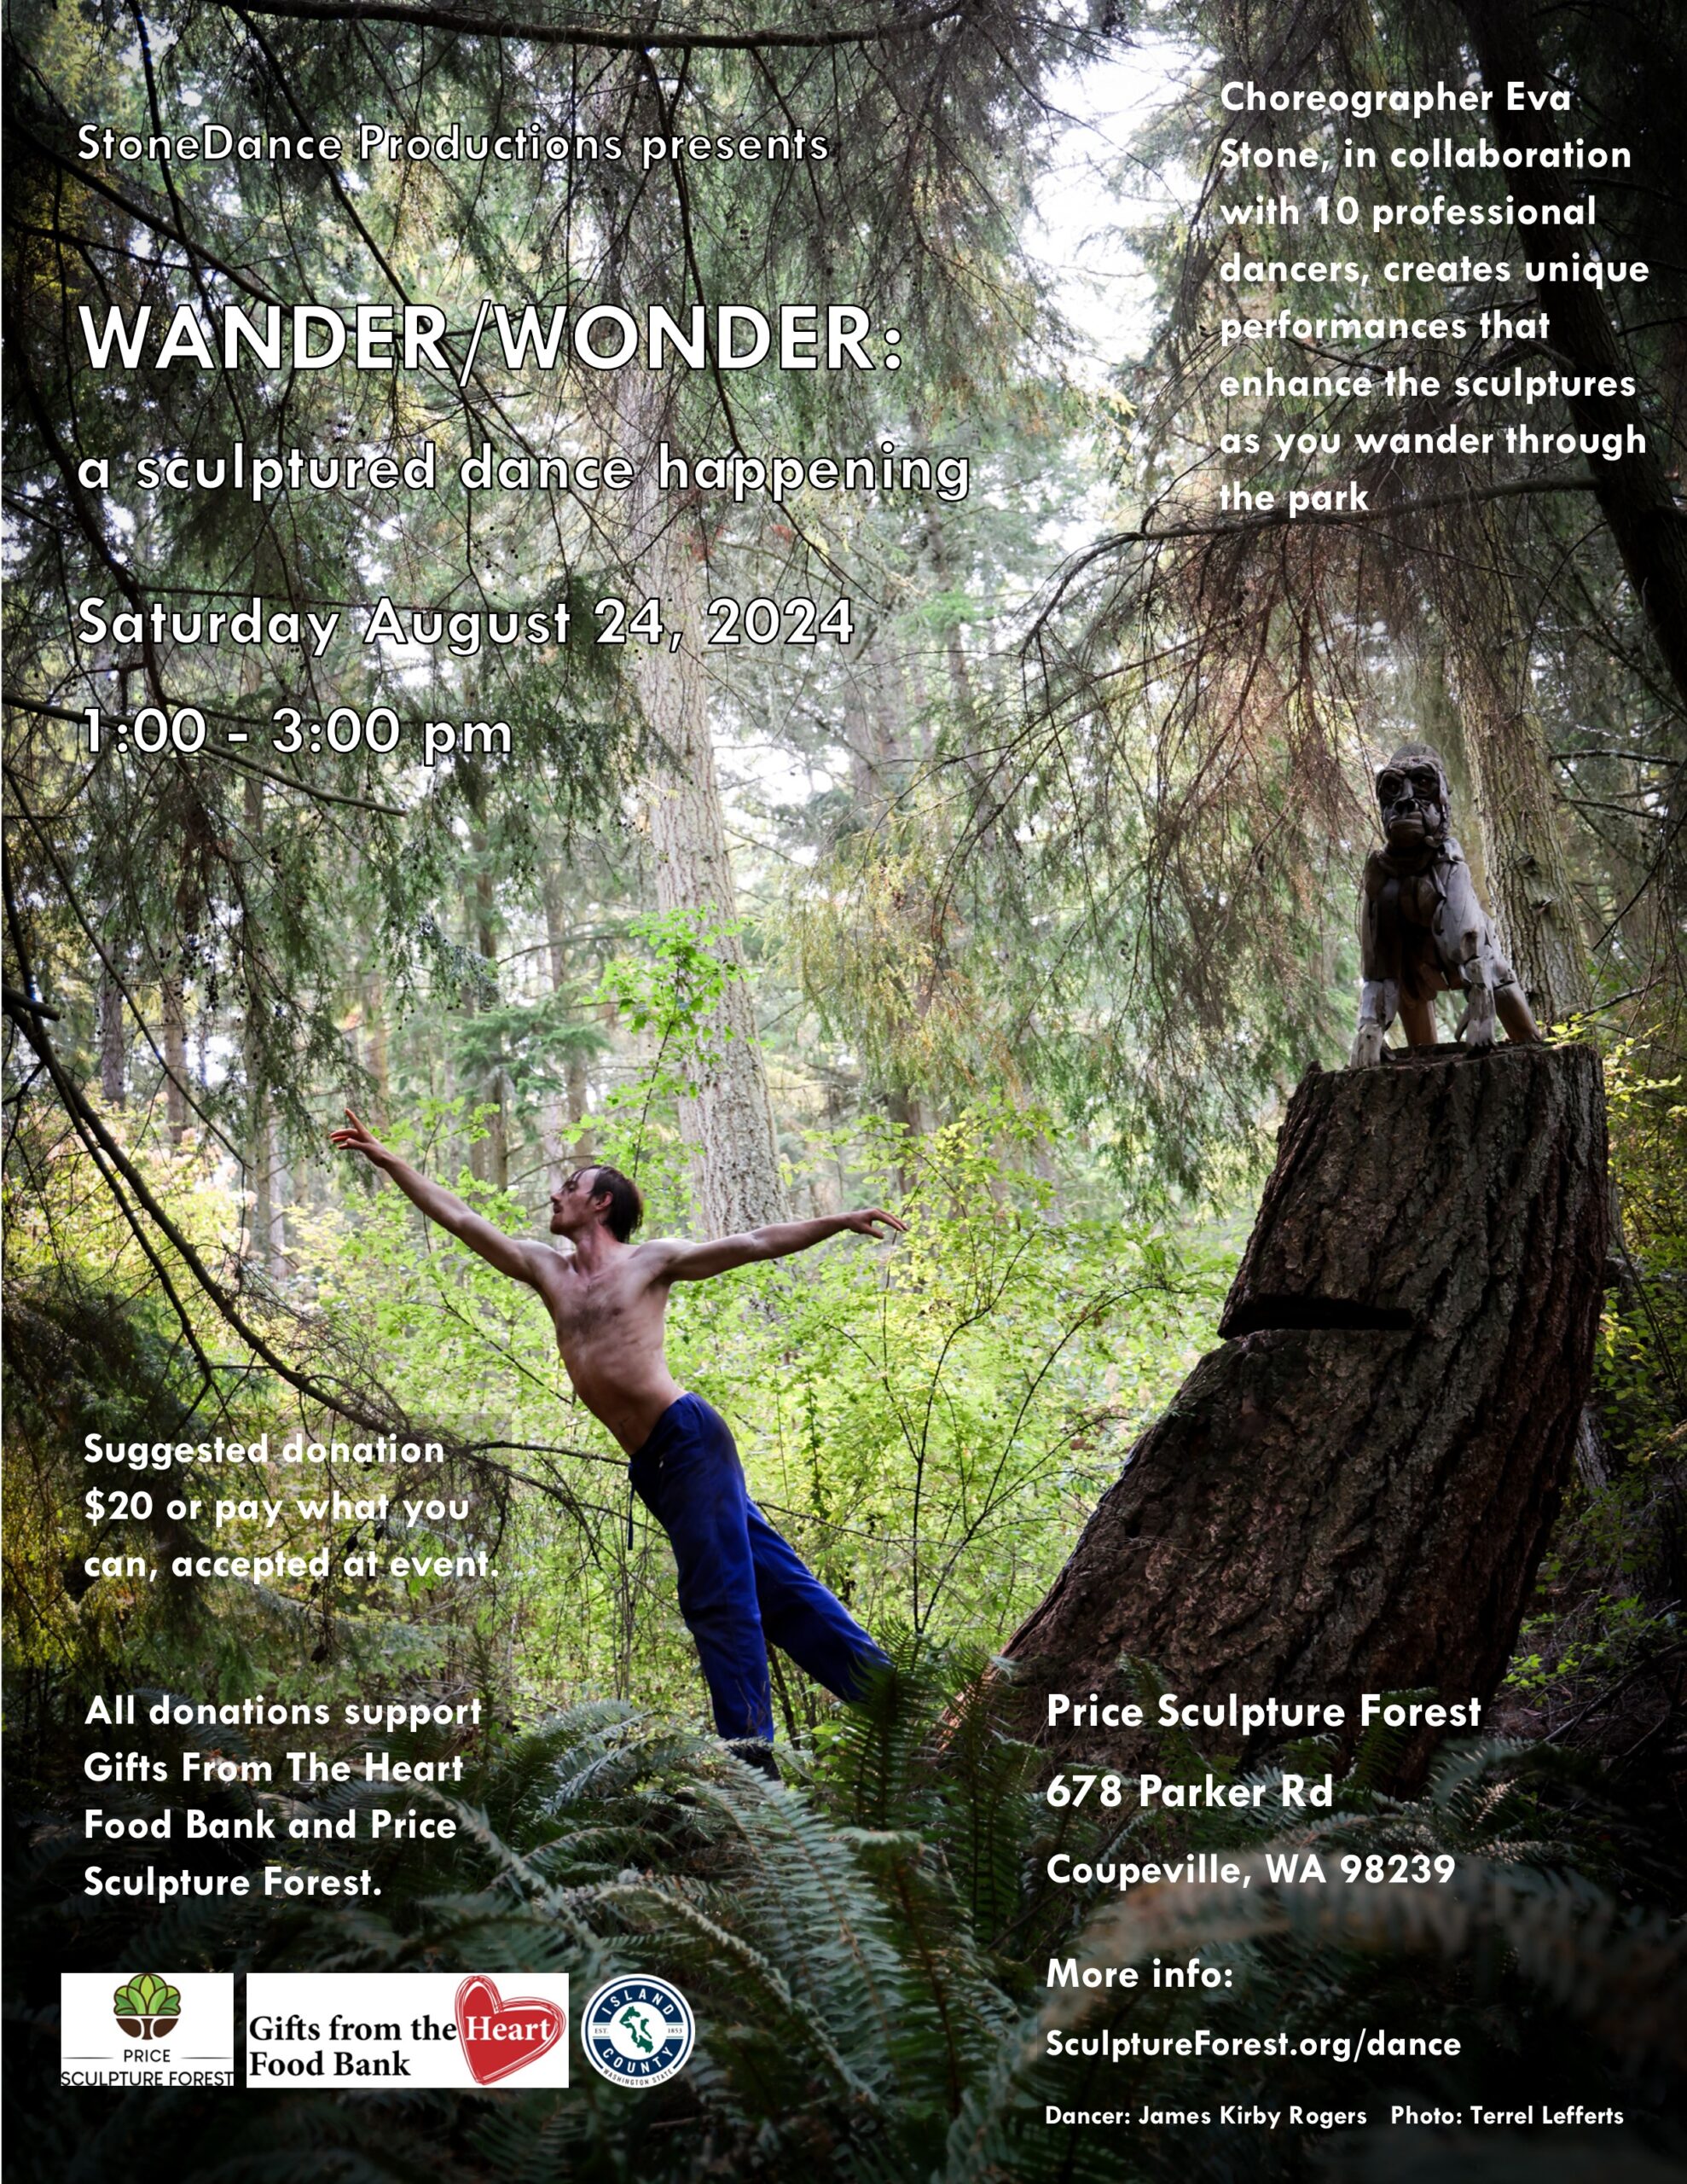 2024-08-24 WANDER WONDER a sculptured dance happening by StoneDance Productions at Price Sculpture Forest